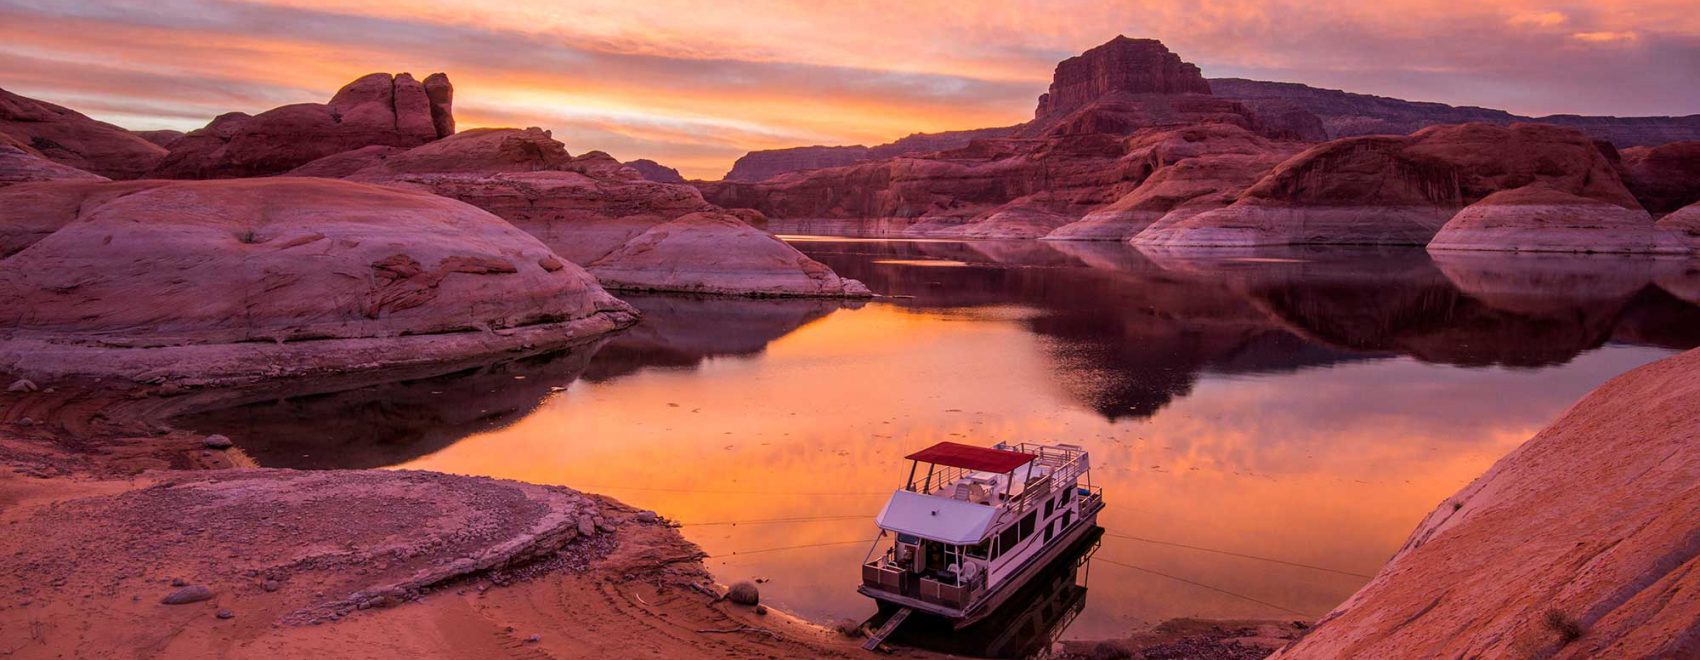 Houseboat on Lake Powell within Glen Canyon National Recreation Area | Photo: Gary Ladd